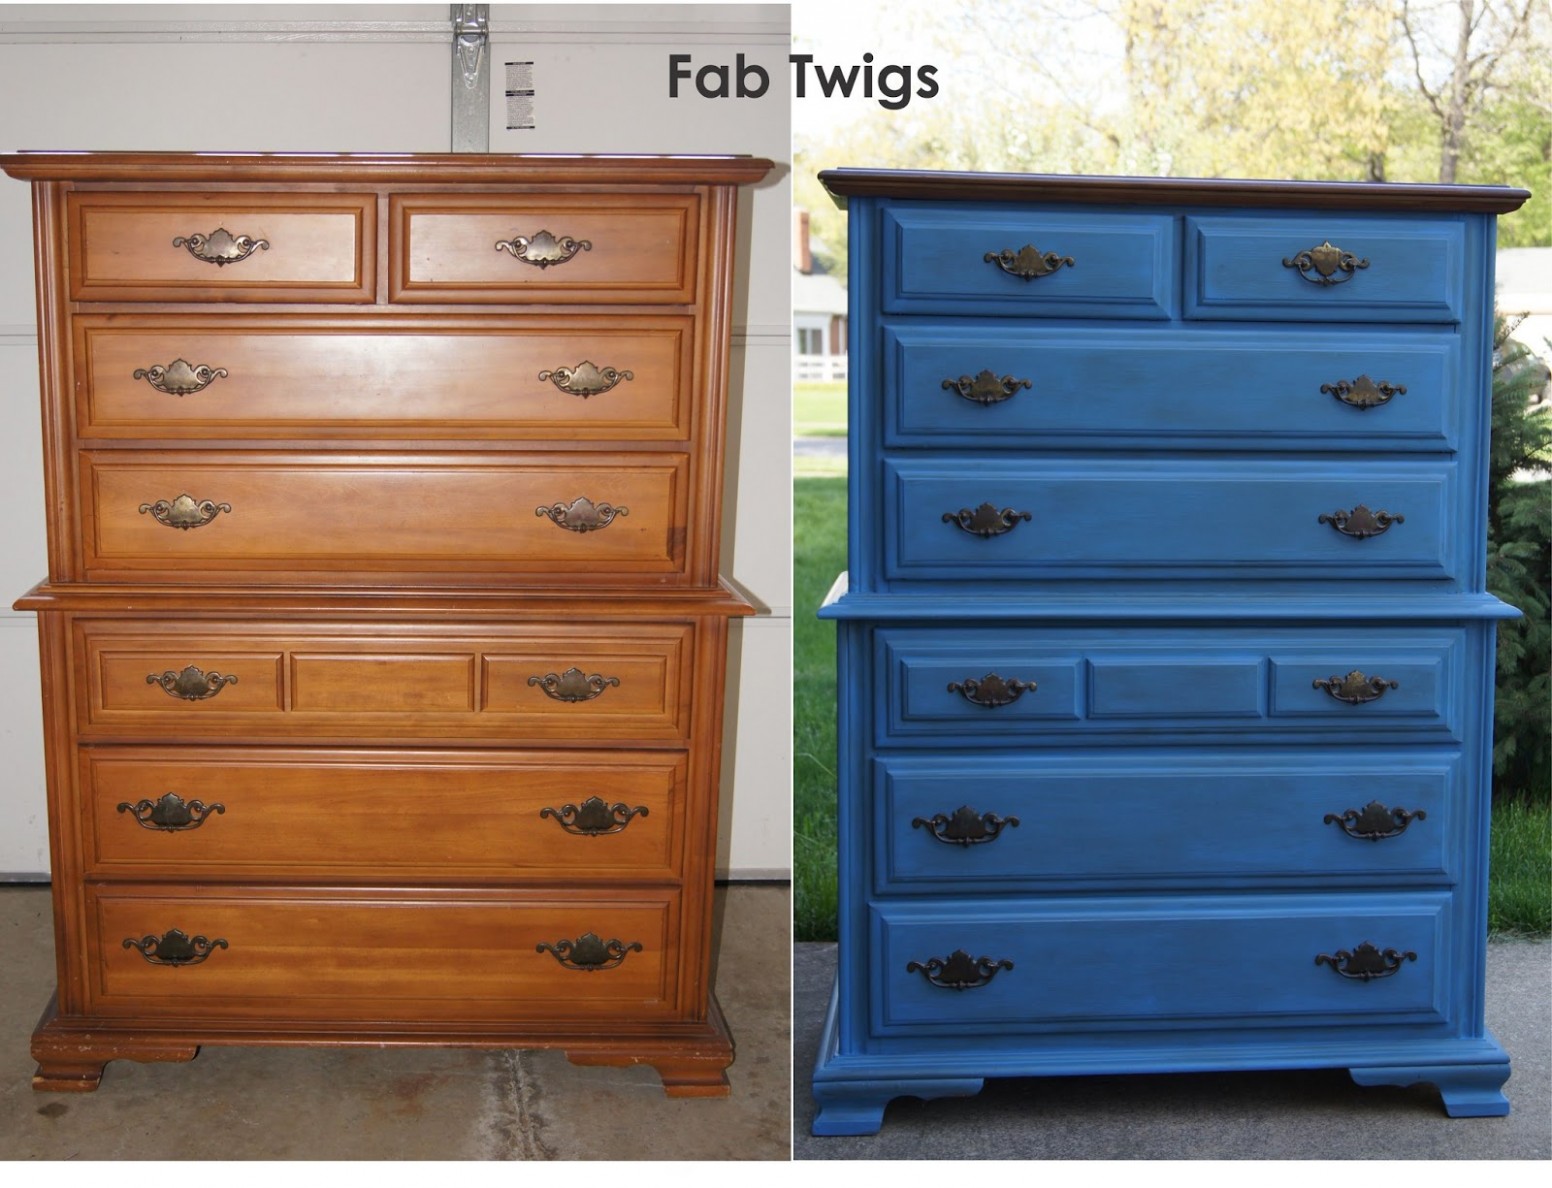 Fabtwigs: Dresser Transformation Painting Furniture With ..